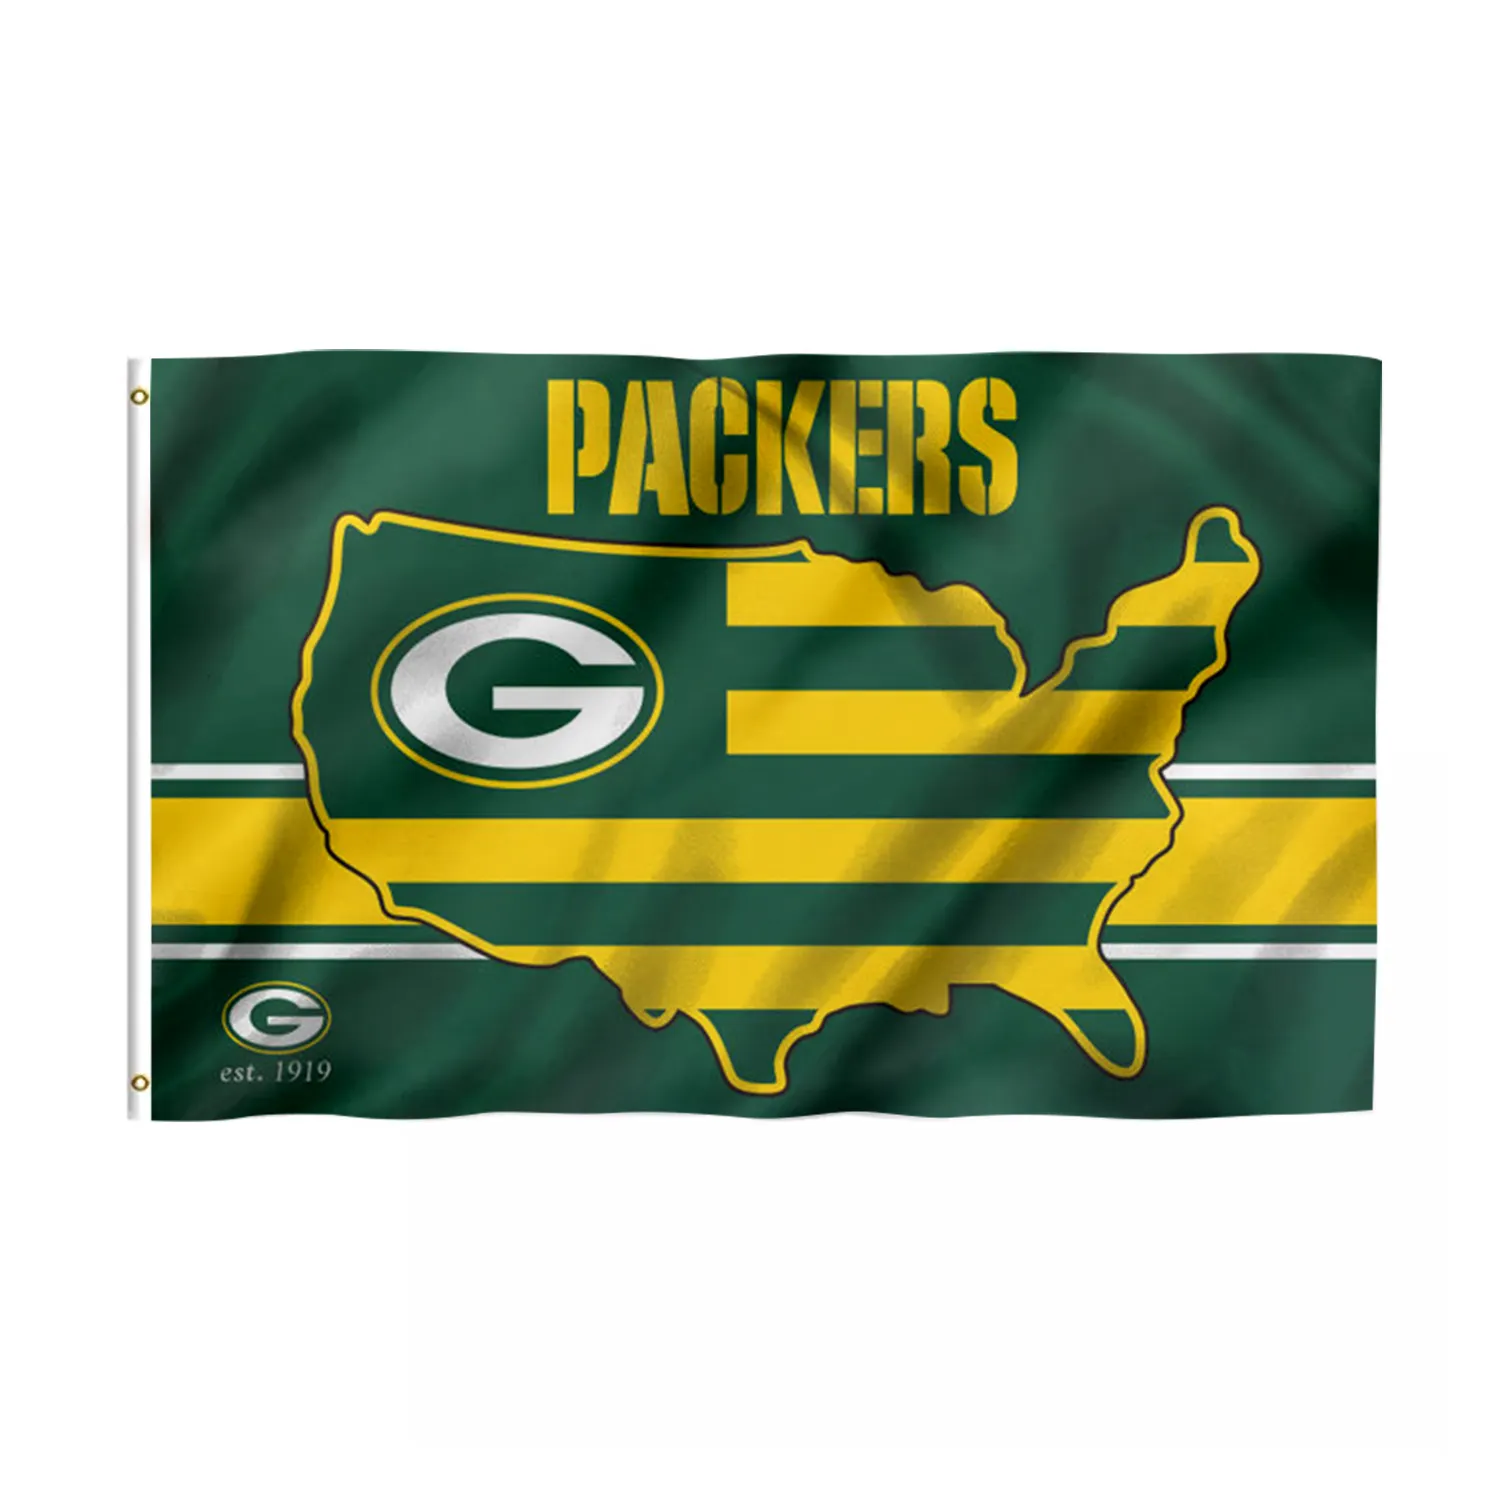 NFL Promotional Product Green Bay Packers Flags 3x5 ft 100% Polyester Used in Super Bowl Custom Green Bay Packers Flags